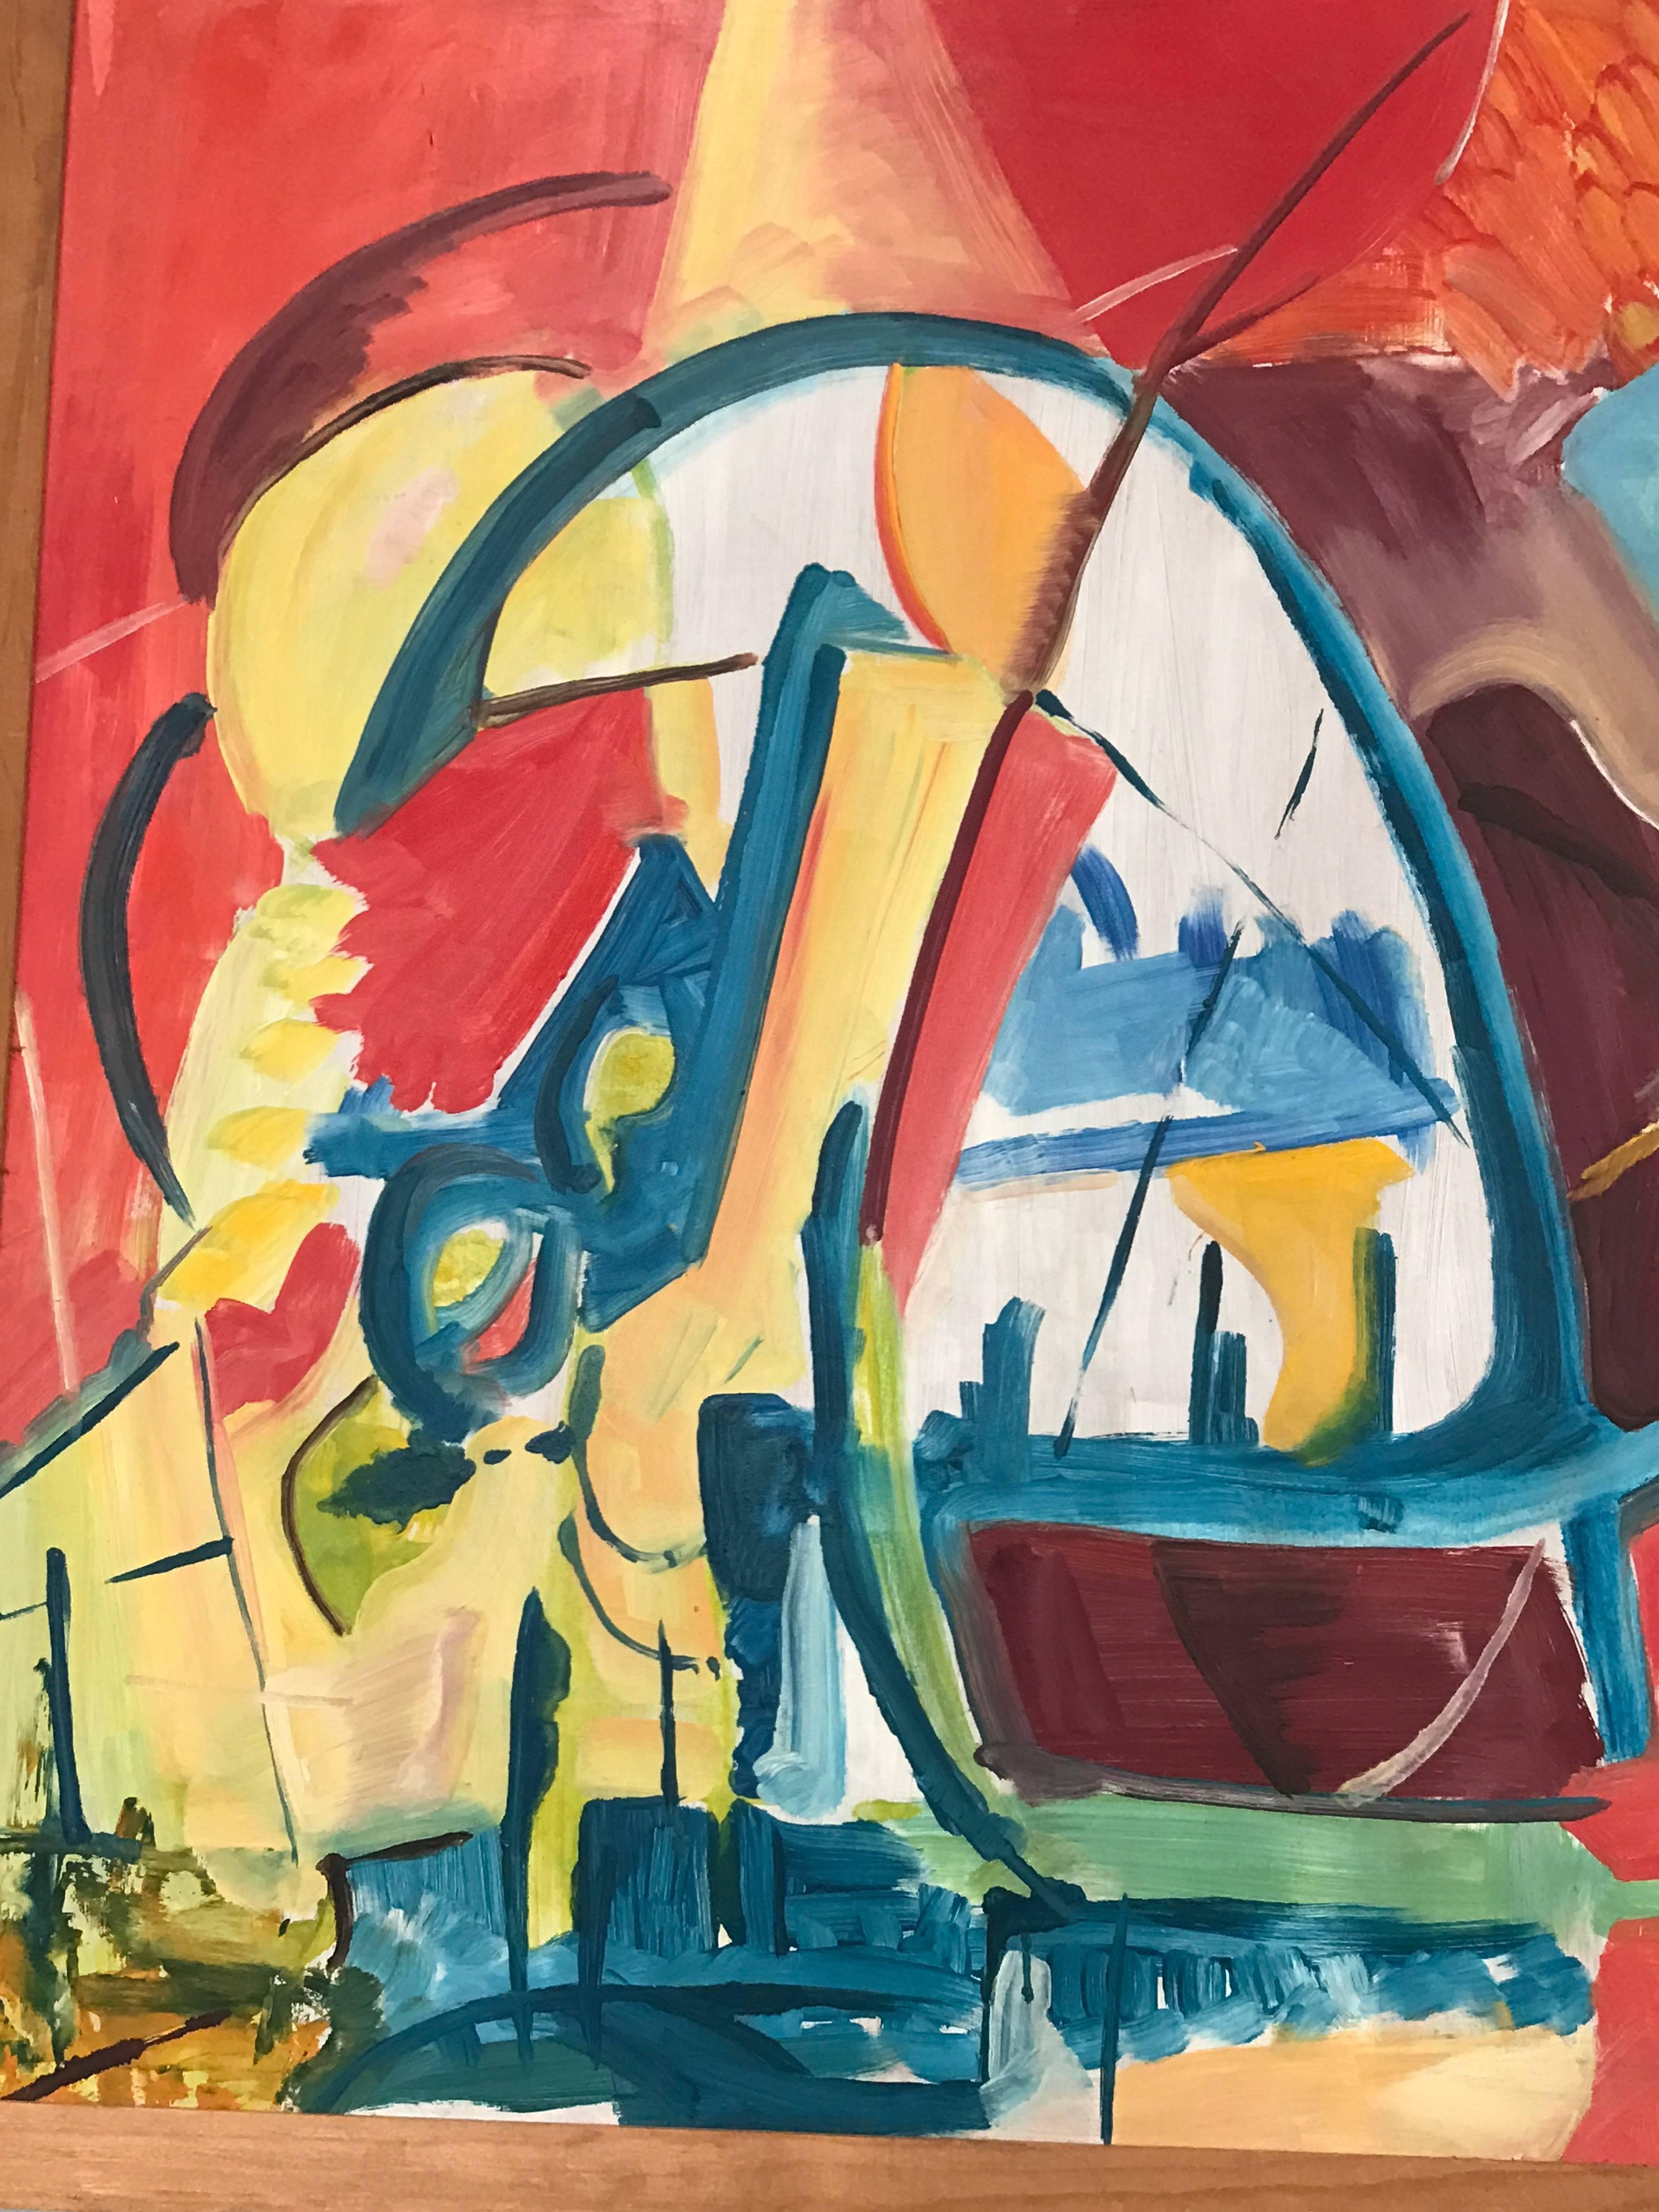 Abstract painting from the estate of Bert Miripolsky, 1953. American artist Miripolsky studied painting at the Chicago Art Institute in the early 1940s and has exhibited throughout the world since 1945. His work portrays very personal emotional